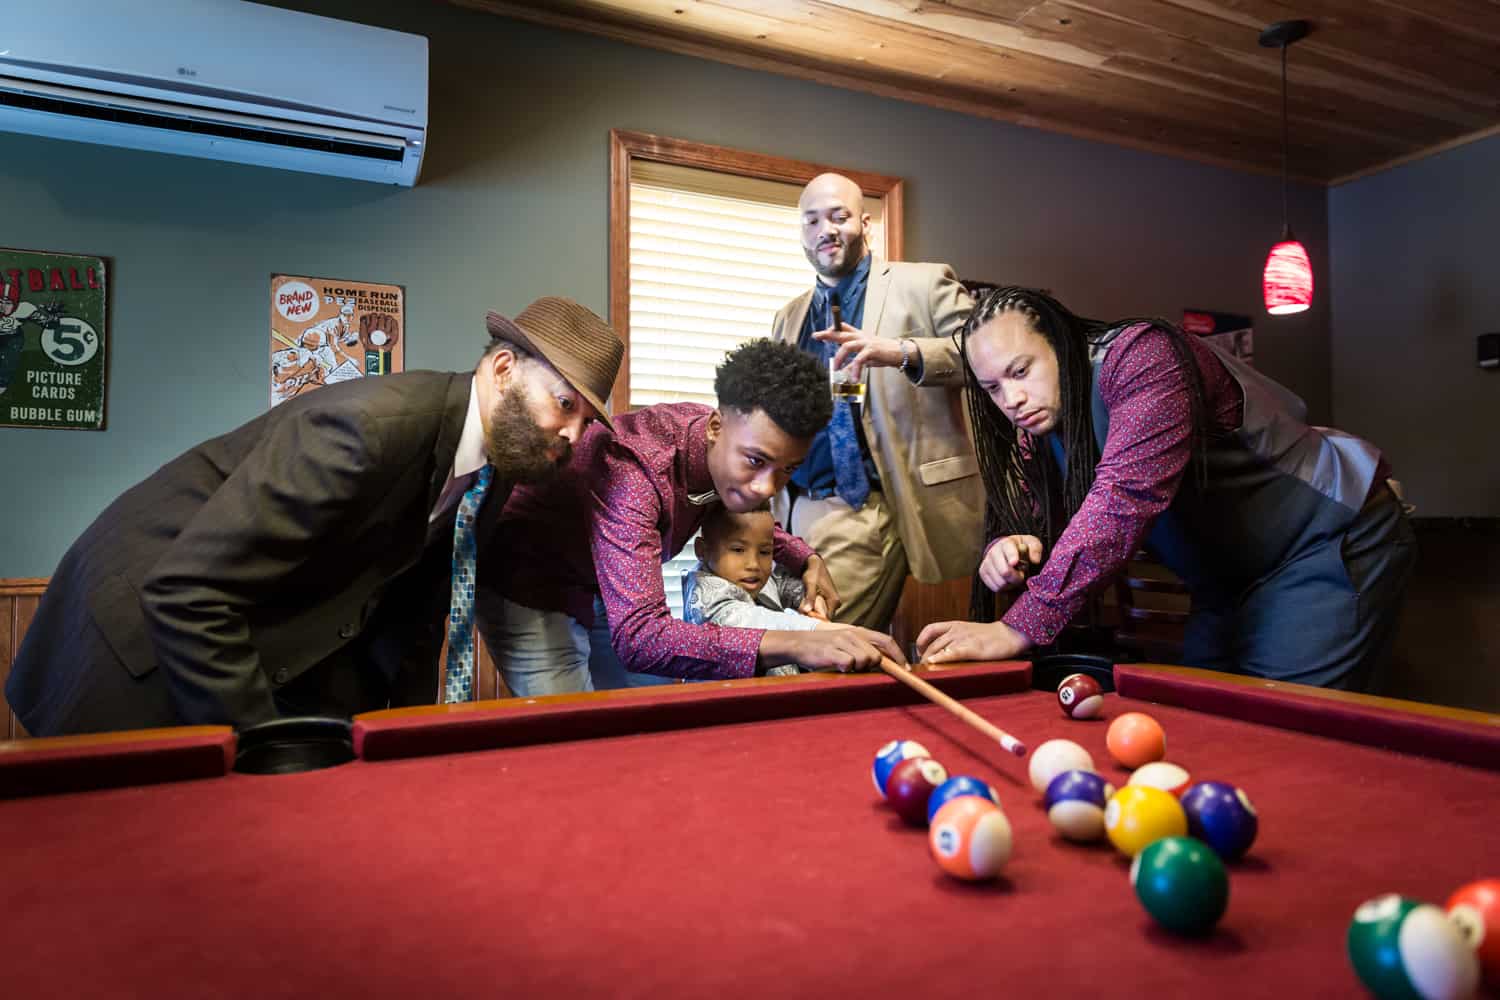 Male family members helping a little boy play pool during a family reunion portrait